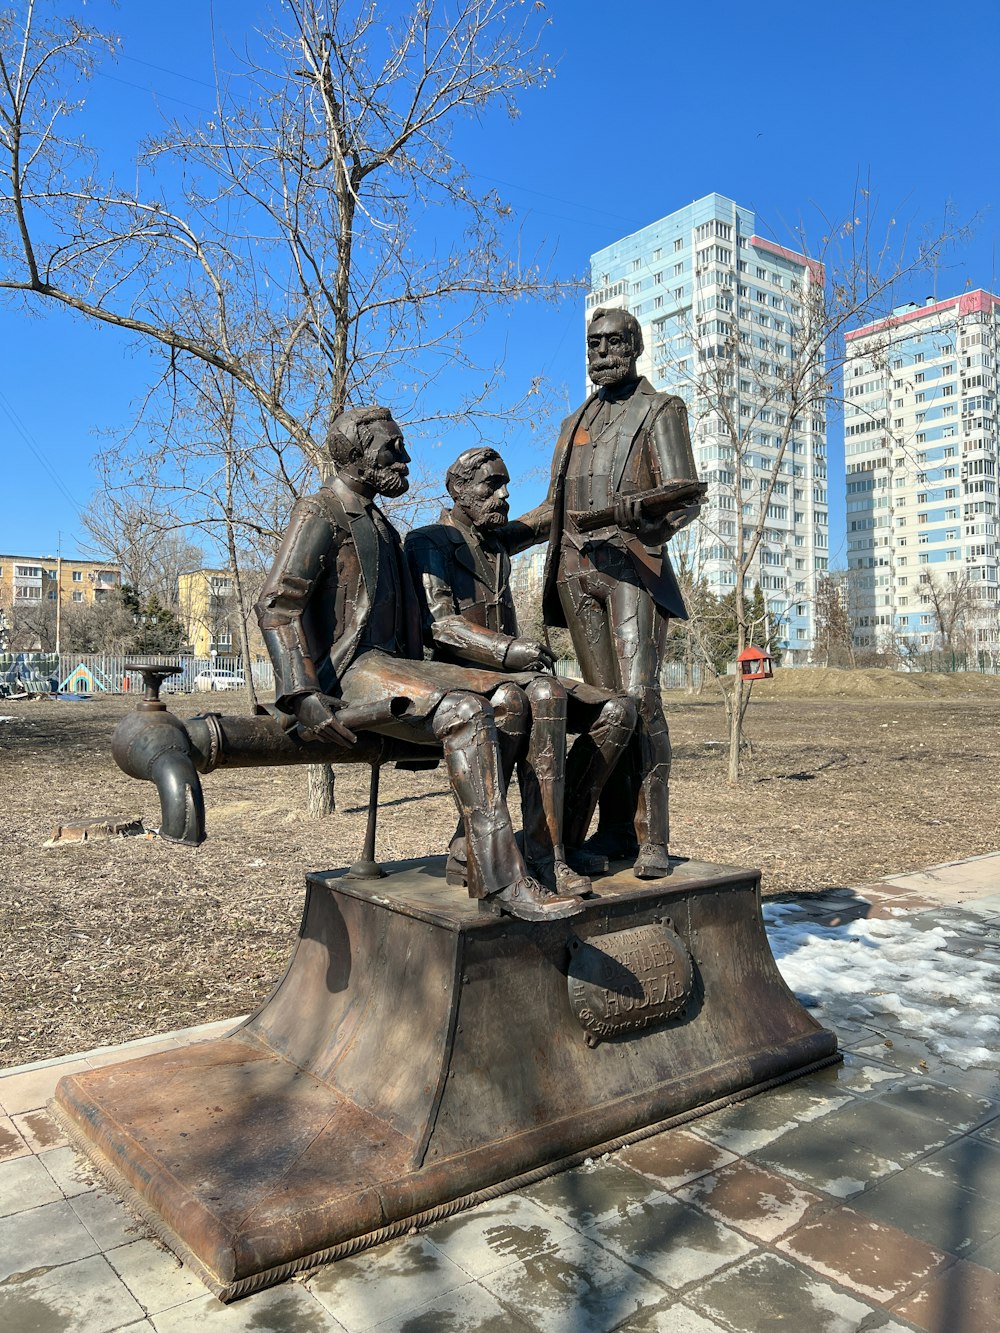 a statue of three people sitting on a bench